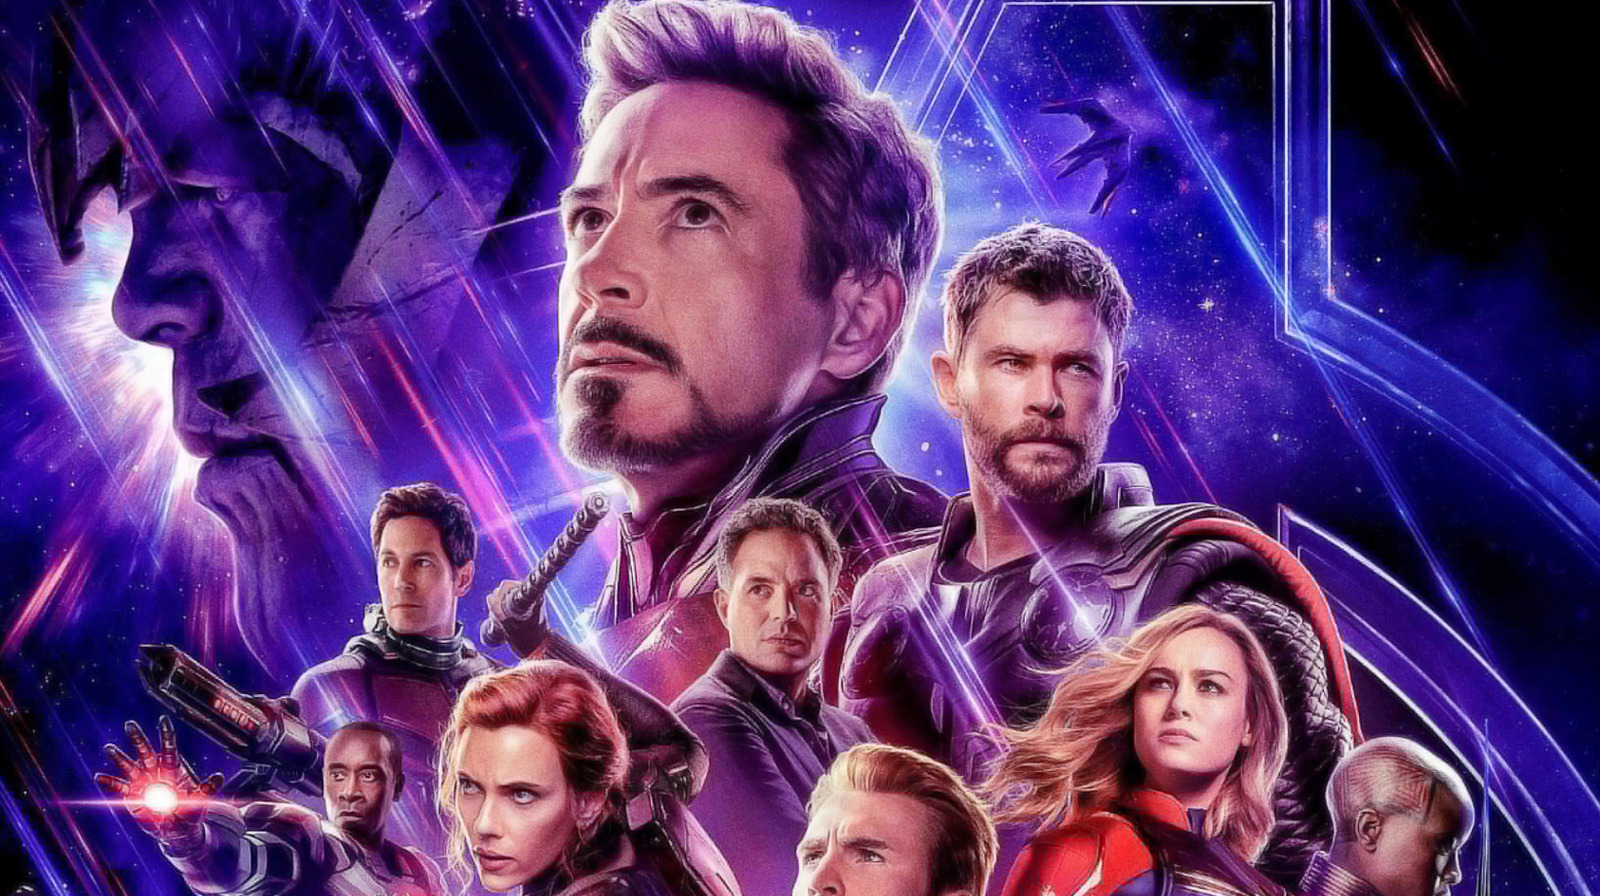 Avengers: Endgame Was The 'Final Avengers Movie' According To Kevin Feige